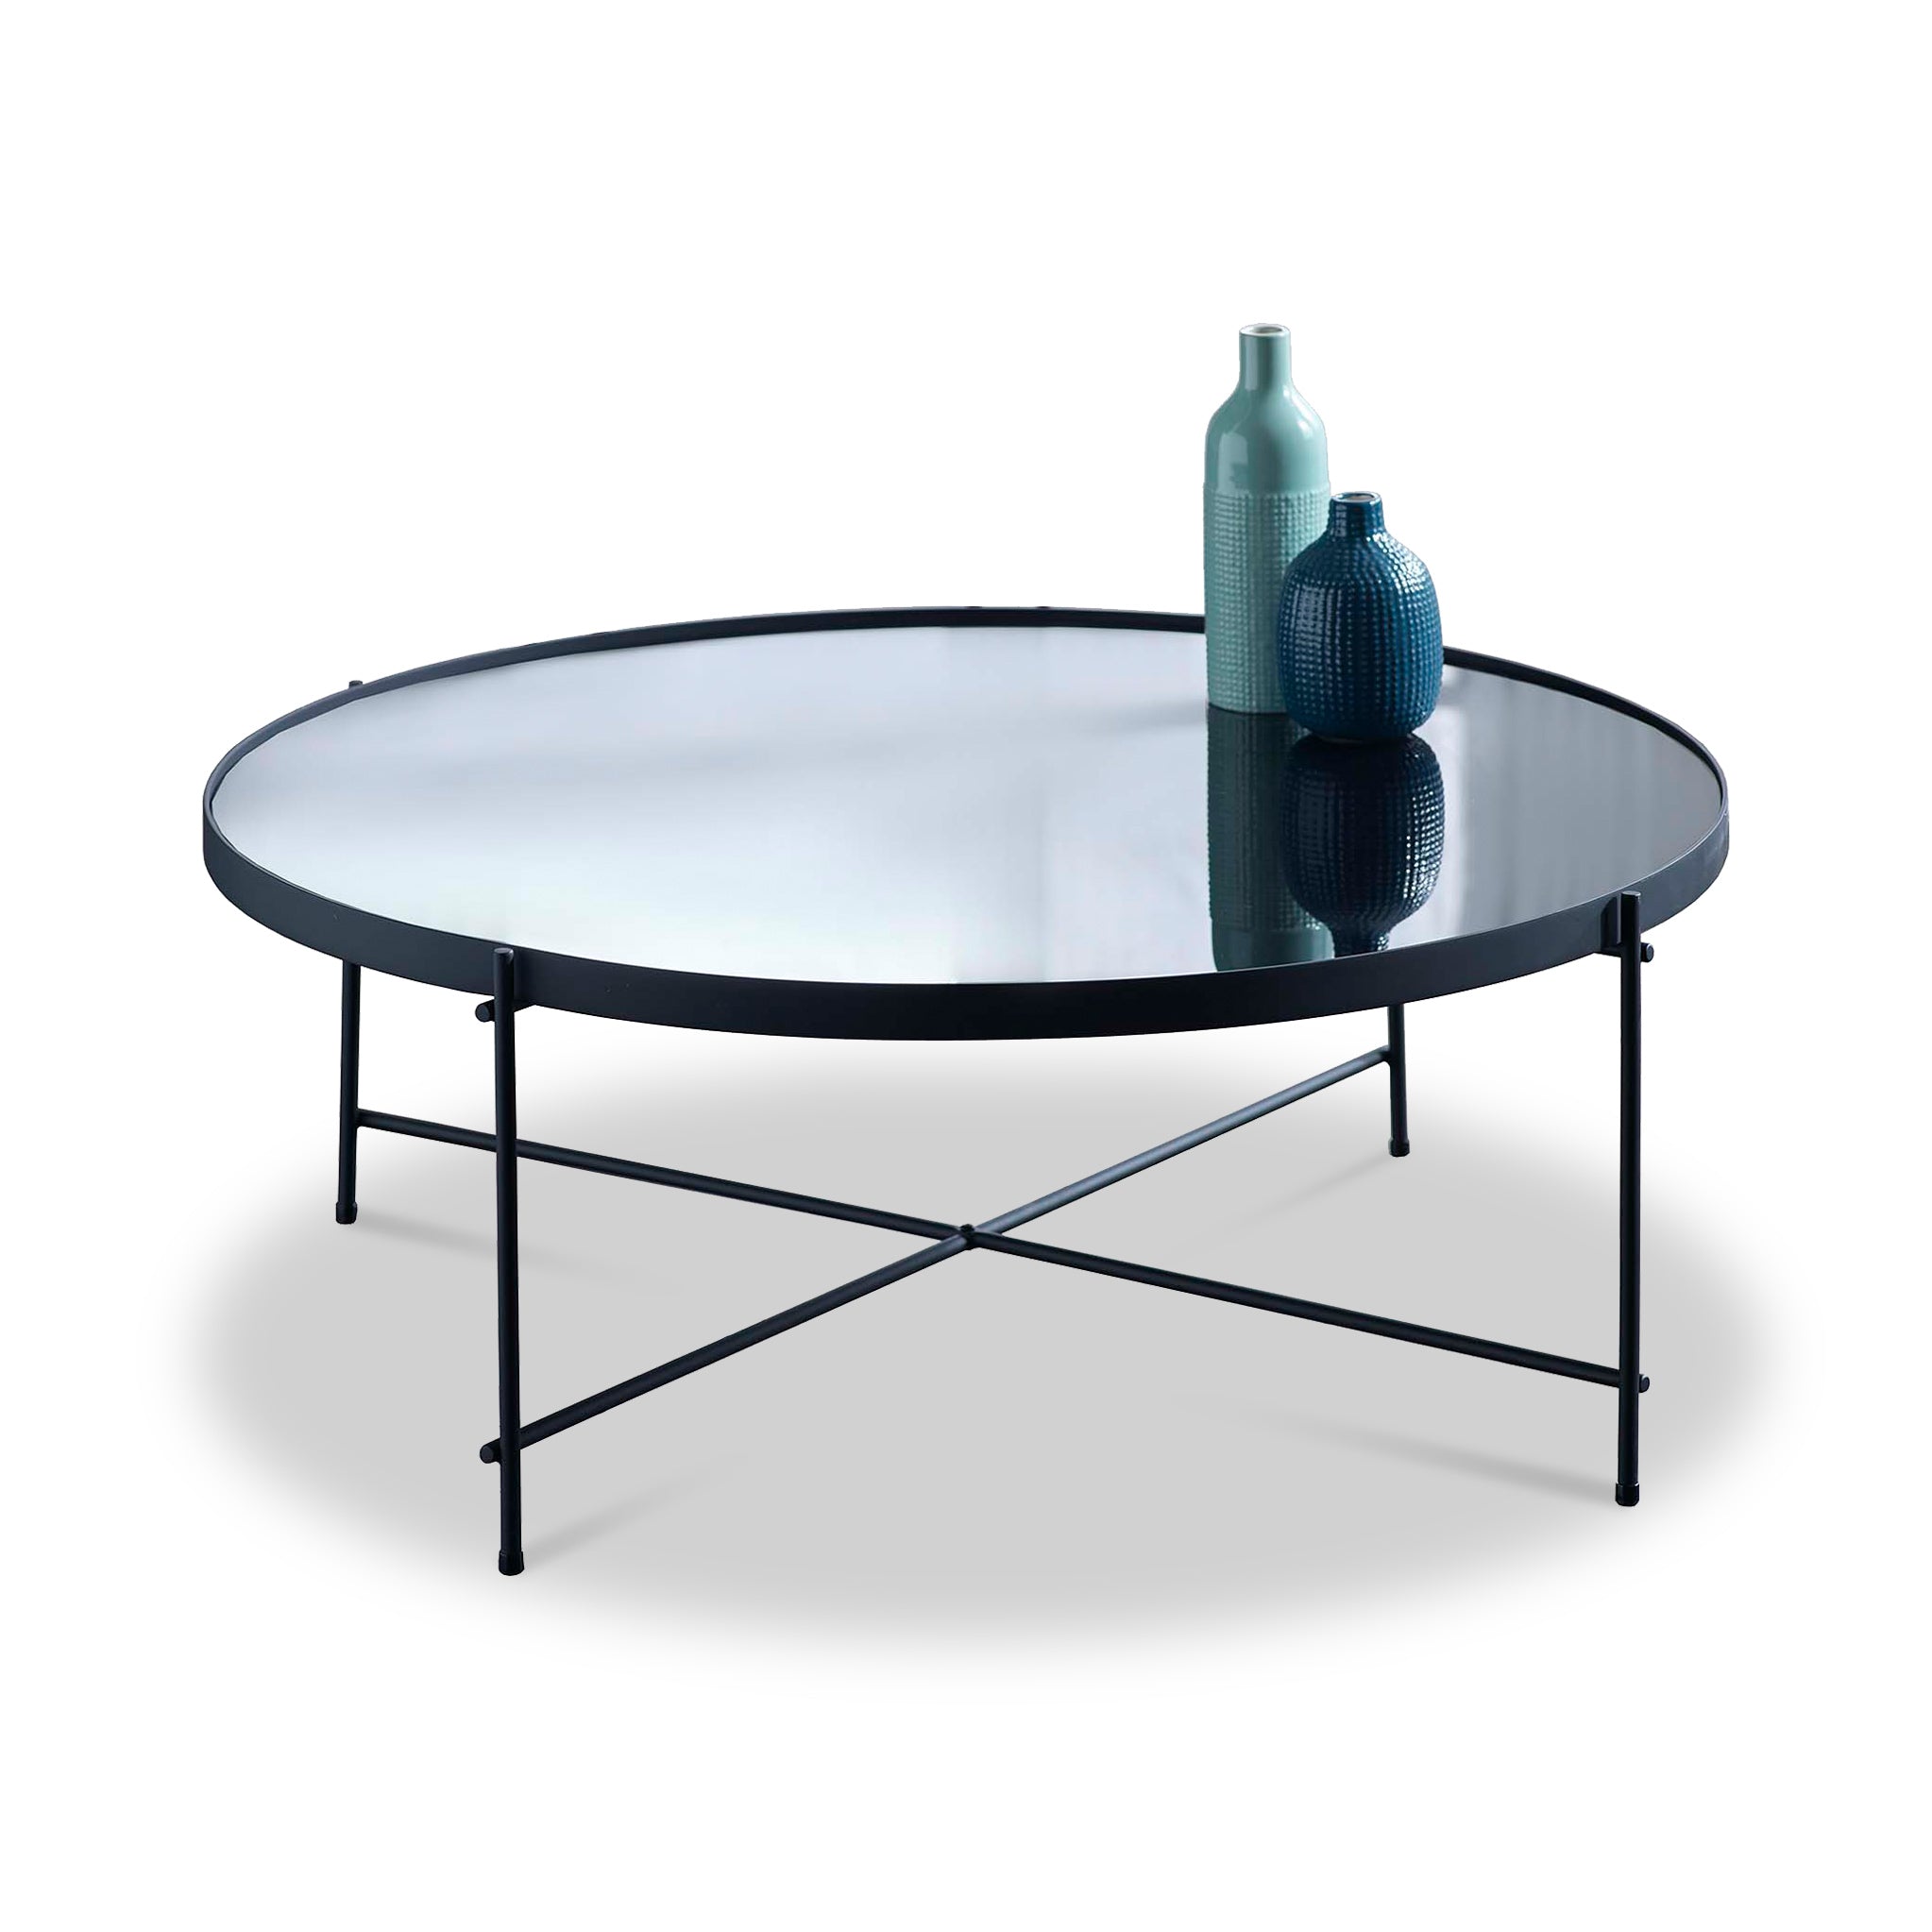 Arla Chic Mirrored Round Metal Coffee Table For Living Room Roseland